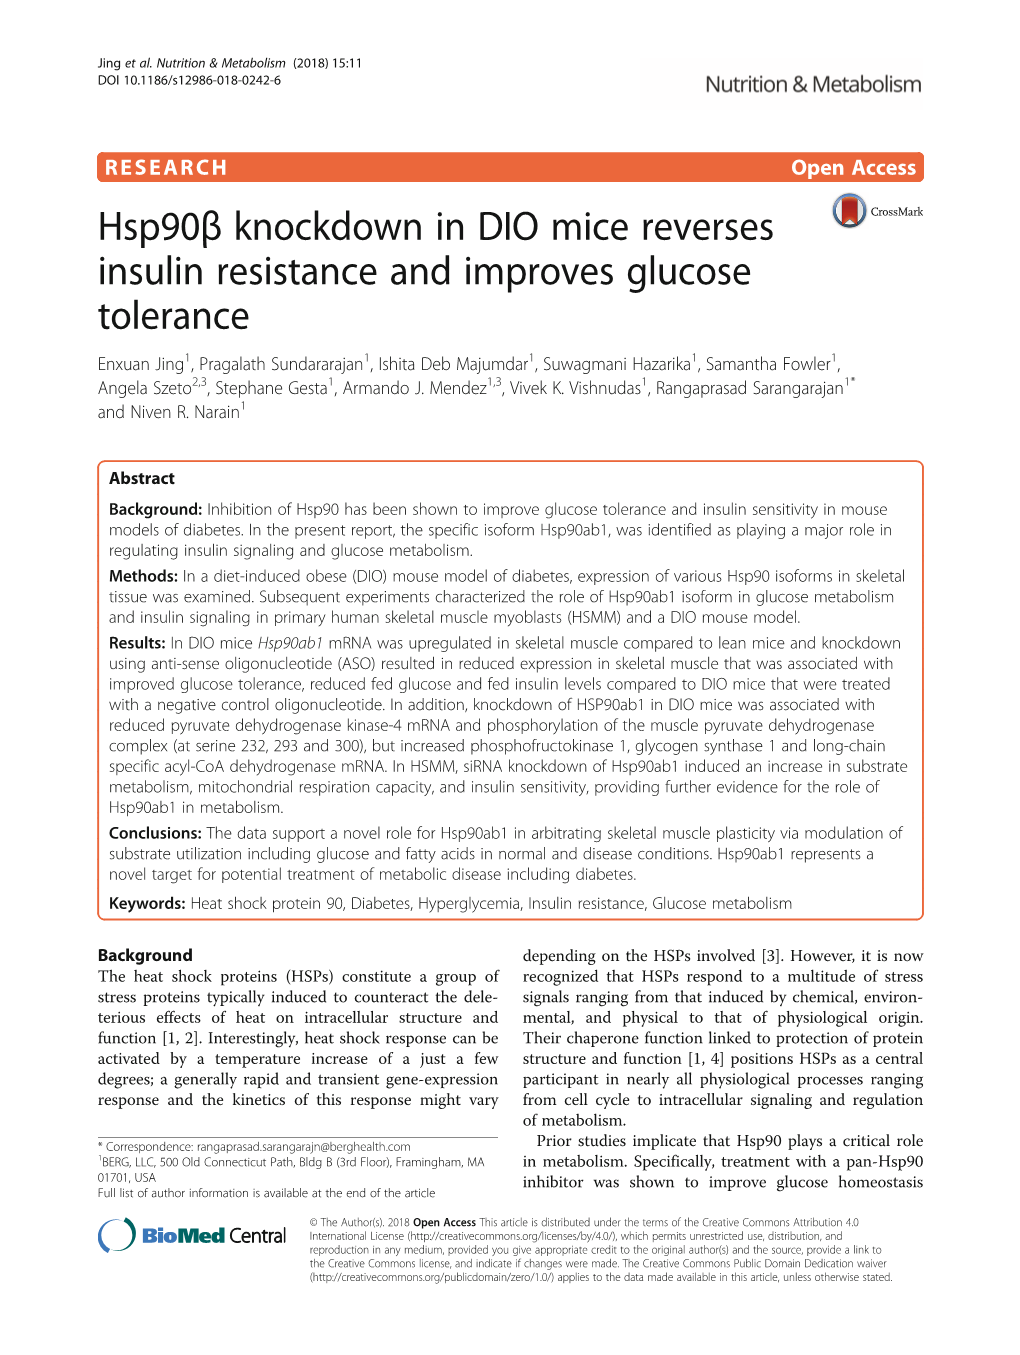 Hsp90β Knockdown in DIO Mice Reverses Insulin Resistance And